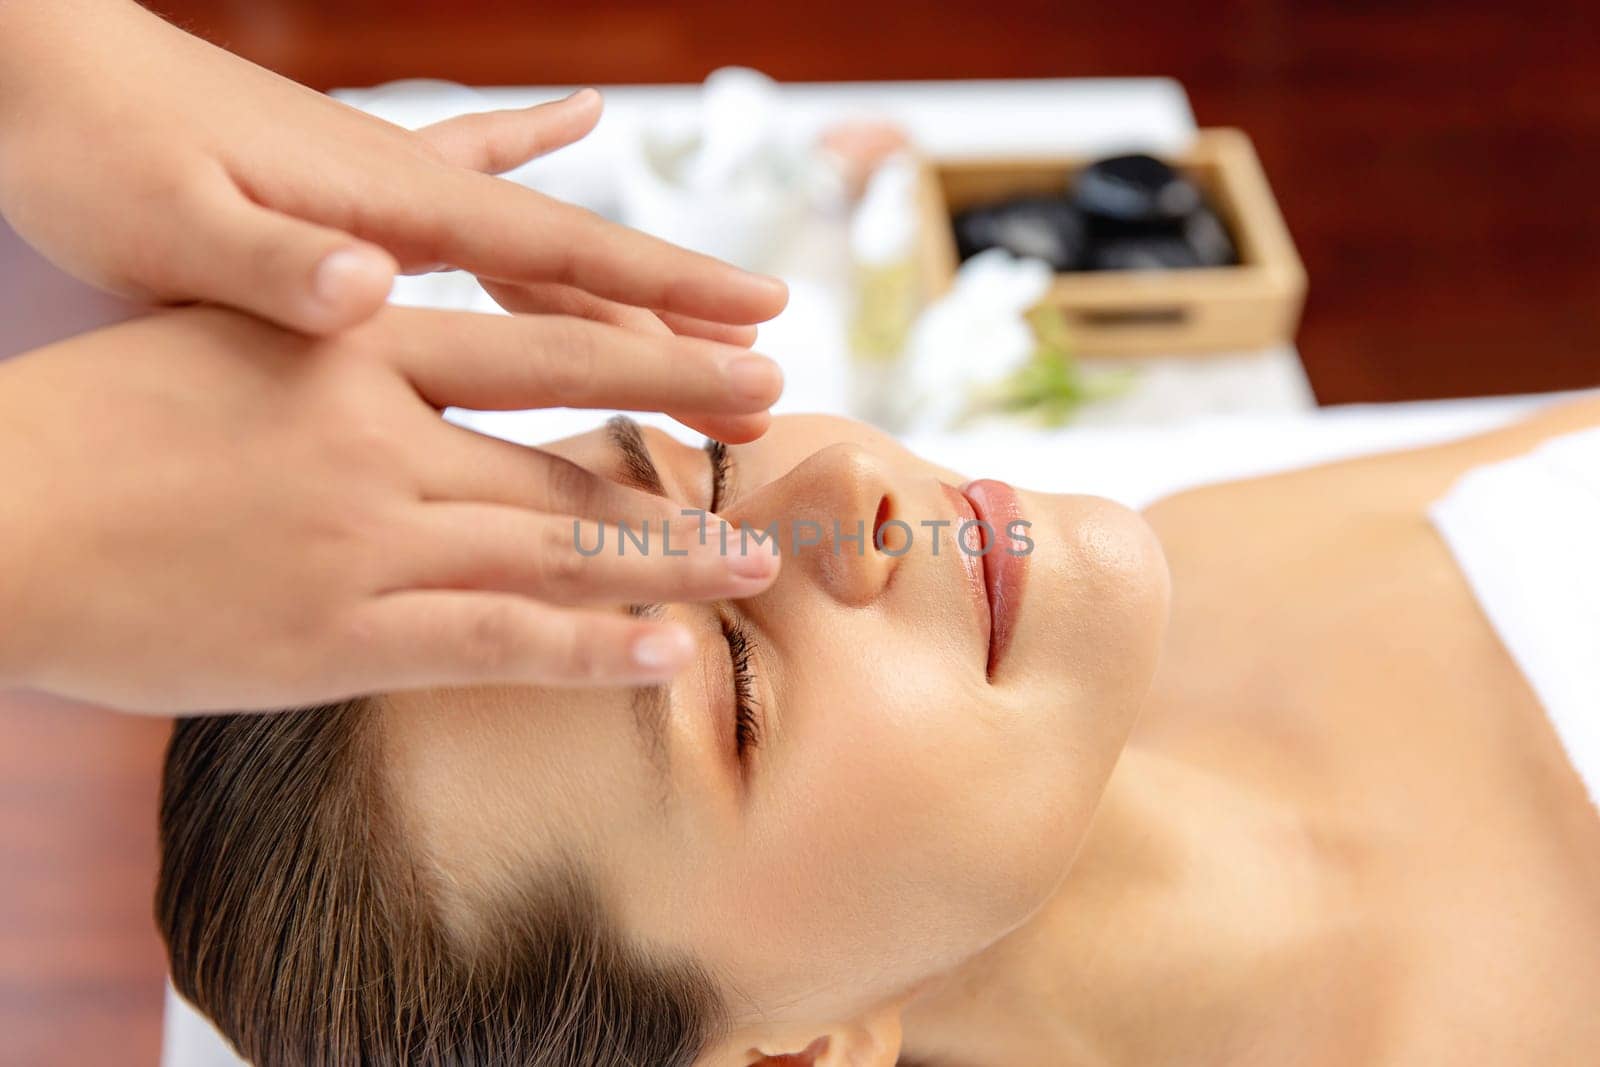 Closeup woman enjoying relaxing anti-stress head massage and pampering facial beauty skin recreation leisure in dayspa modern light ambient at luxury resort or hotel spa salon. Quiescent